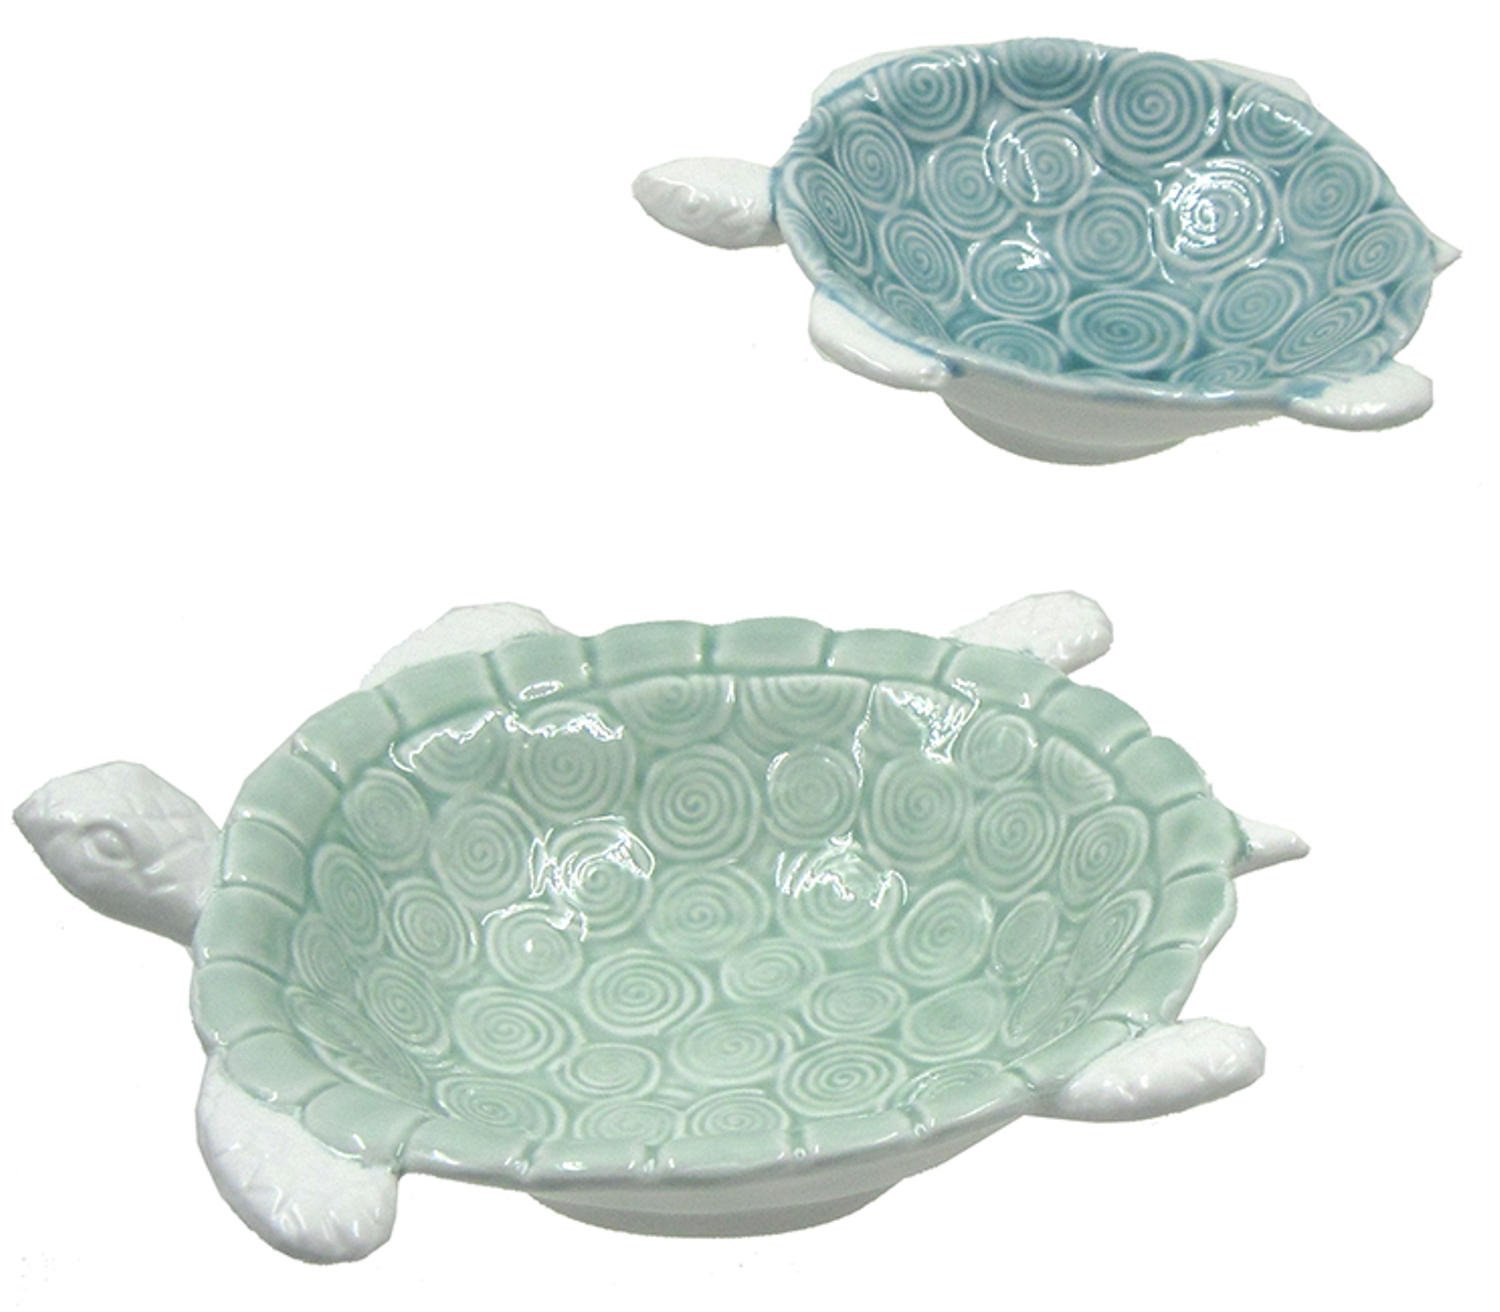 Chesapeake Bay Blue and Green Sea Turtles Porcelain Serving Dishes Set of 2